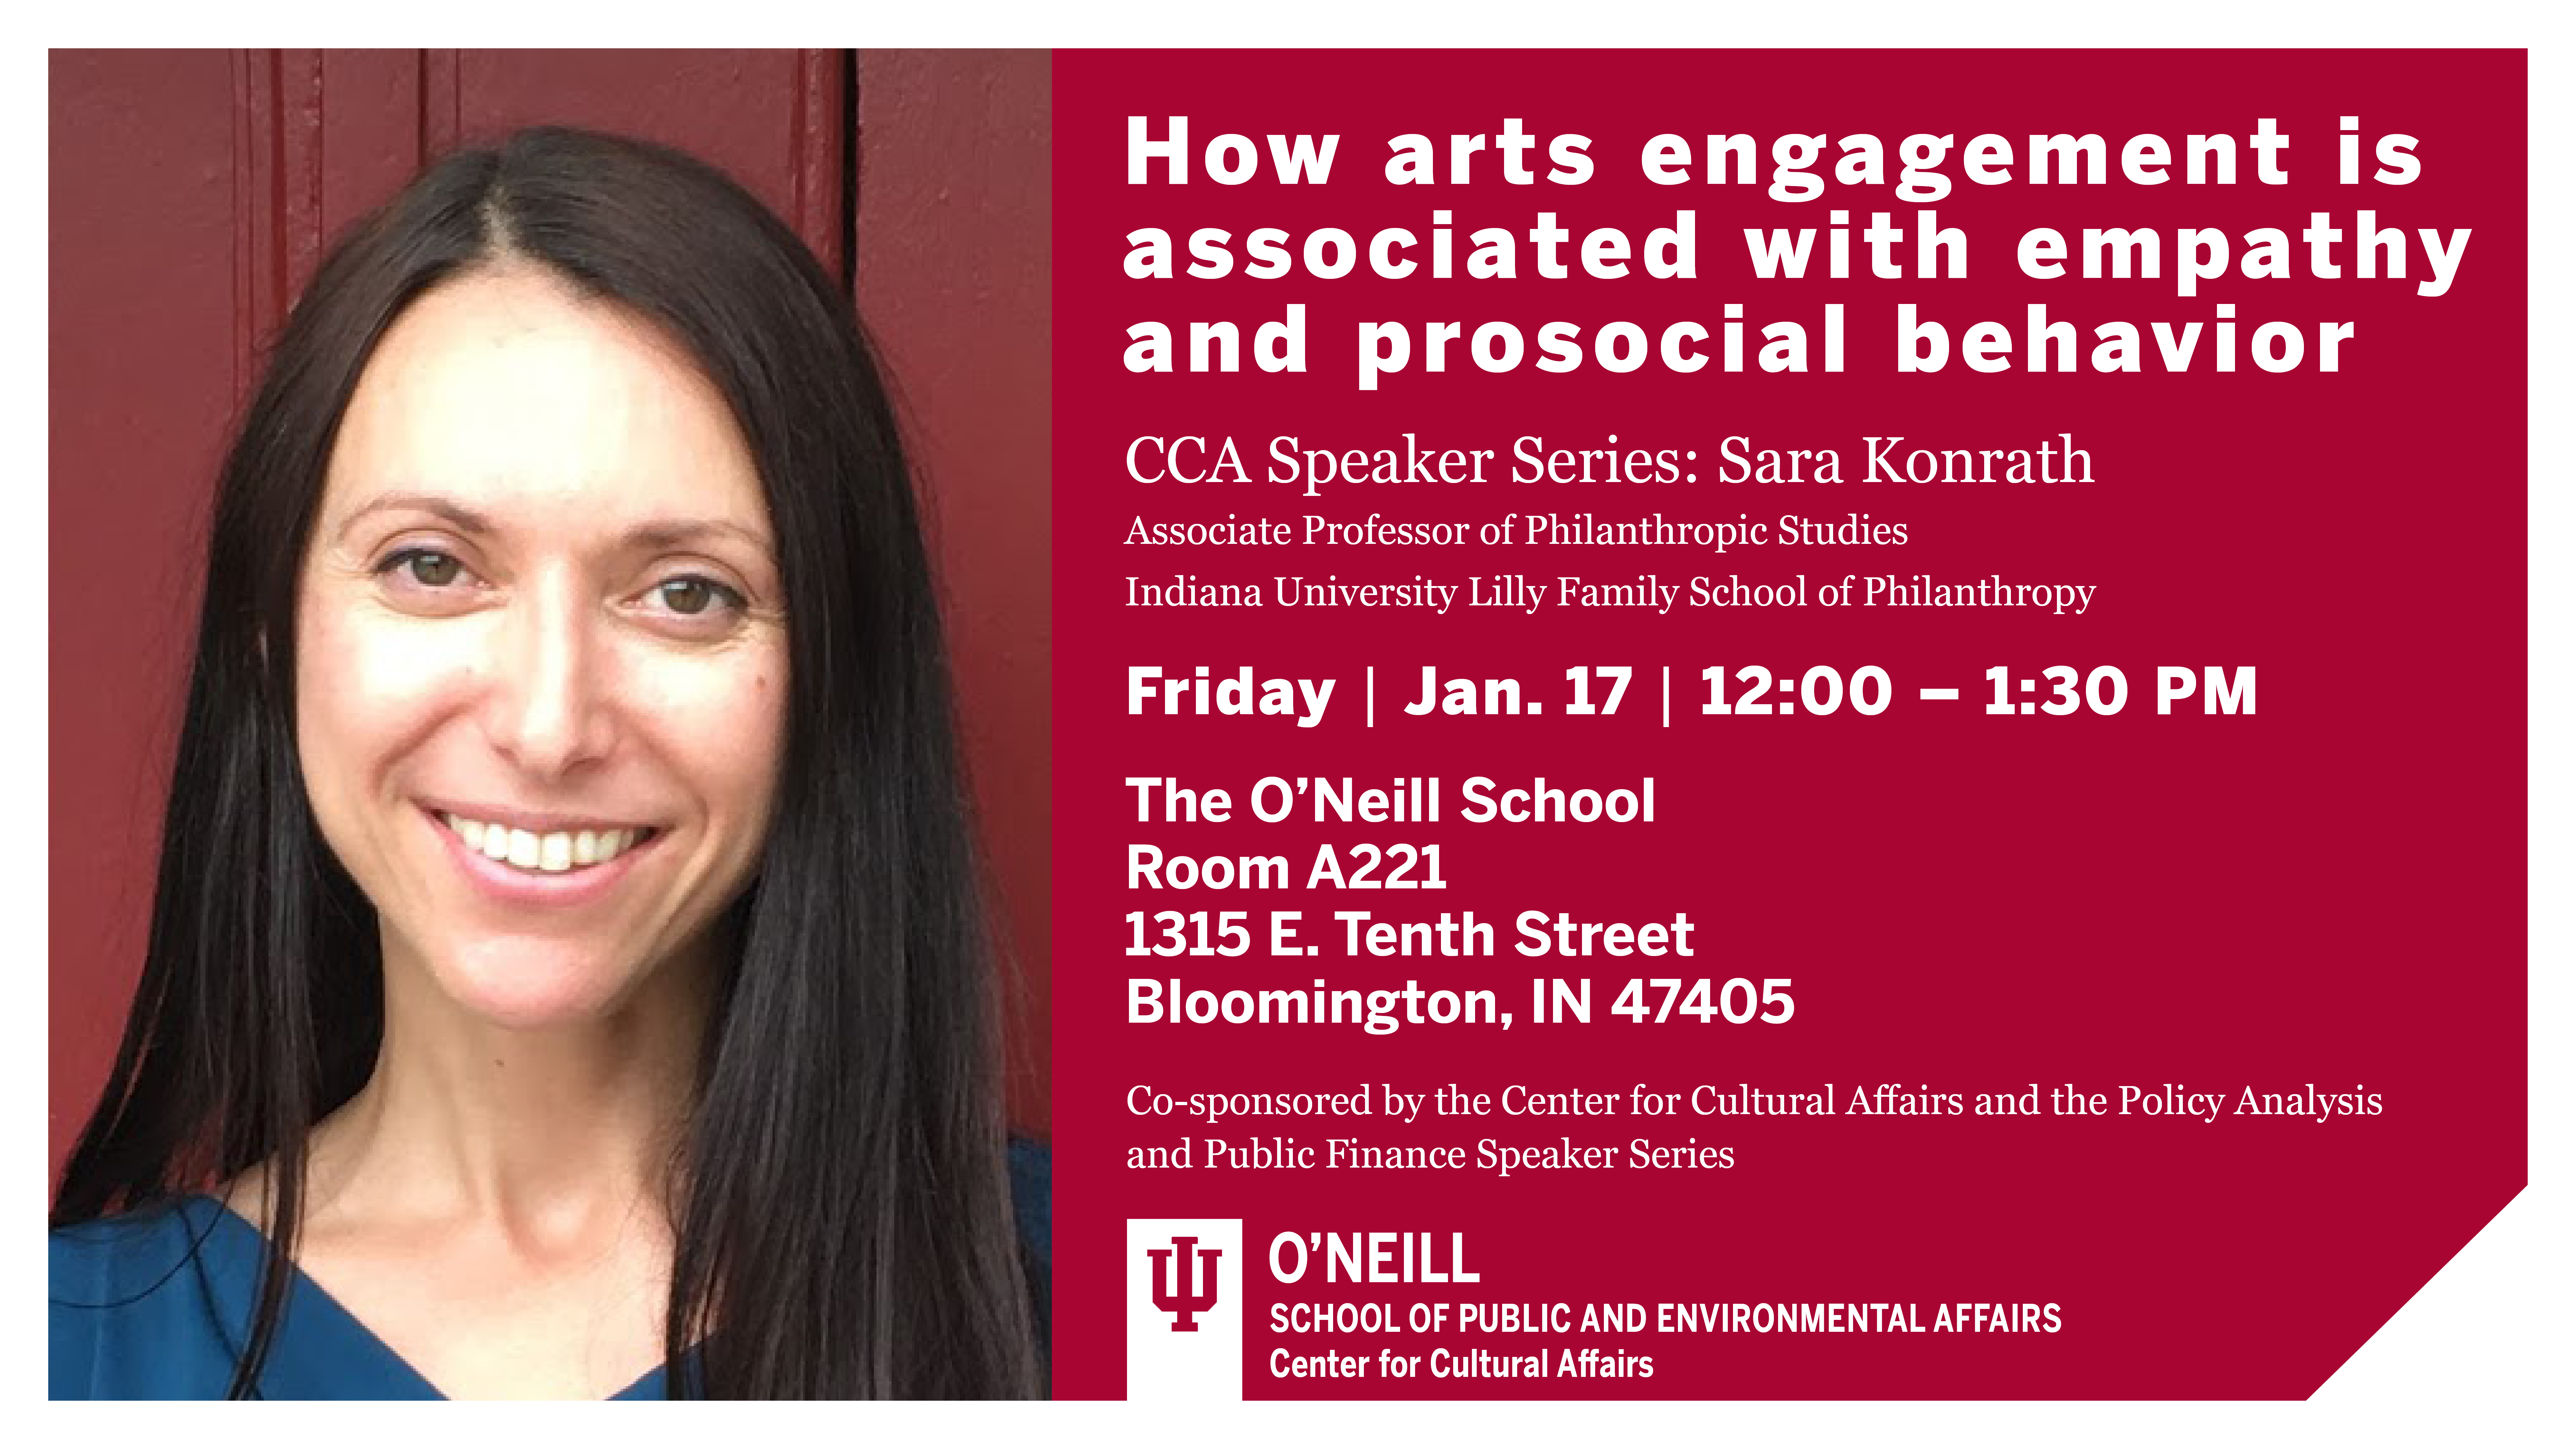 How arts engagement is associated with empathy and prosocial behavior  CCA Speaker Series: Sara Konrath  Associate Professor of Philanthropic Studies, Indiana University Lilly Family School of Philanthropy  Friday Jan 17 12:00-1:30 p.m.  The O'Neill School  Room A221  1315 E Tenth Street  Bloomington, IN 47401  Co-sponsored by the Center for Cultural Affairs and the Policy Analysis and Public Finance Speaker Series